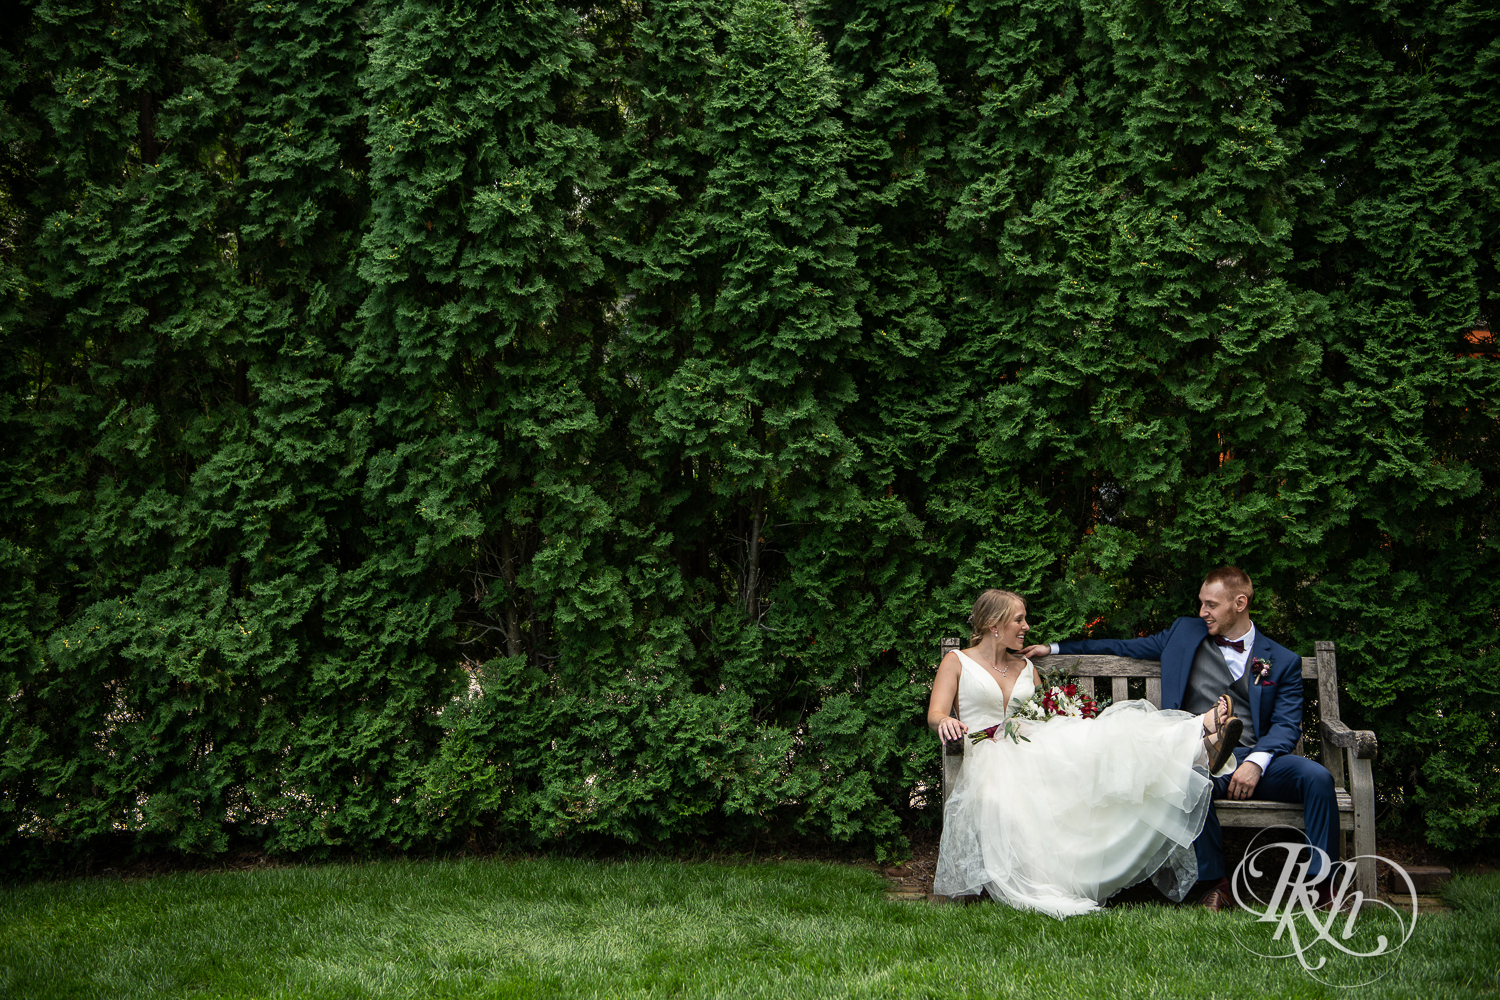 Bride and groom smile on bench at the William Sauntry Mansion in Stillwater, Minnesota.